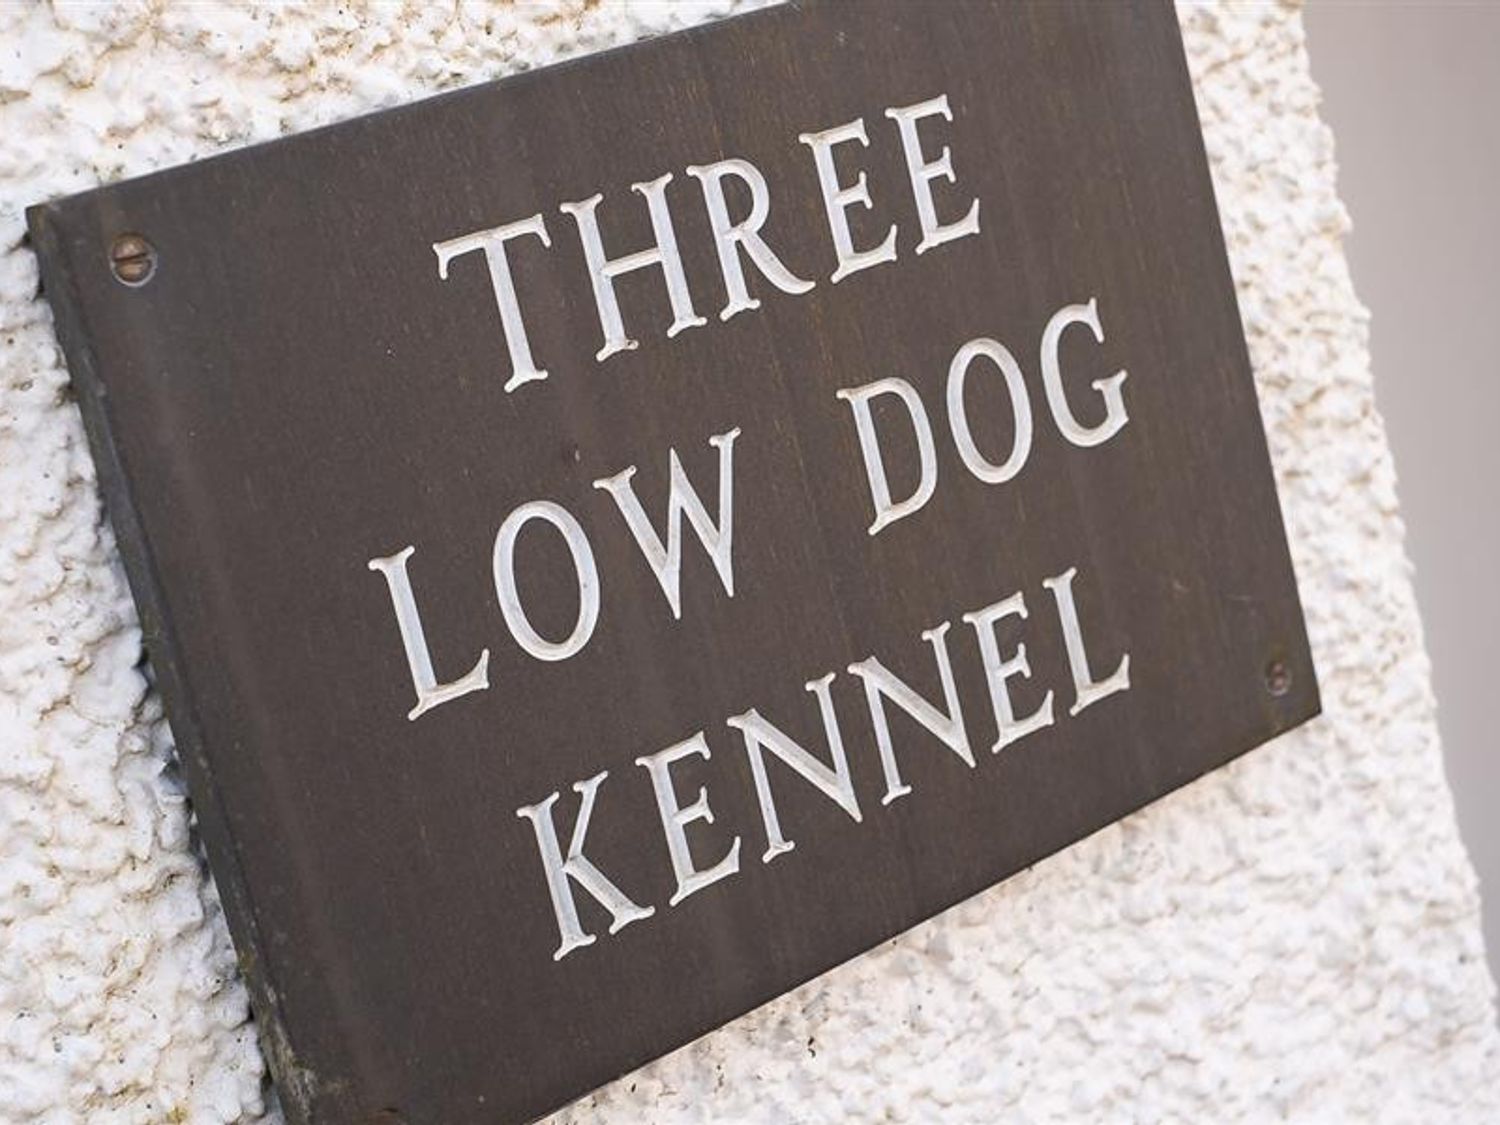 Low Dog Kennel Cottage - Lake District - 1042073 - photo 1